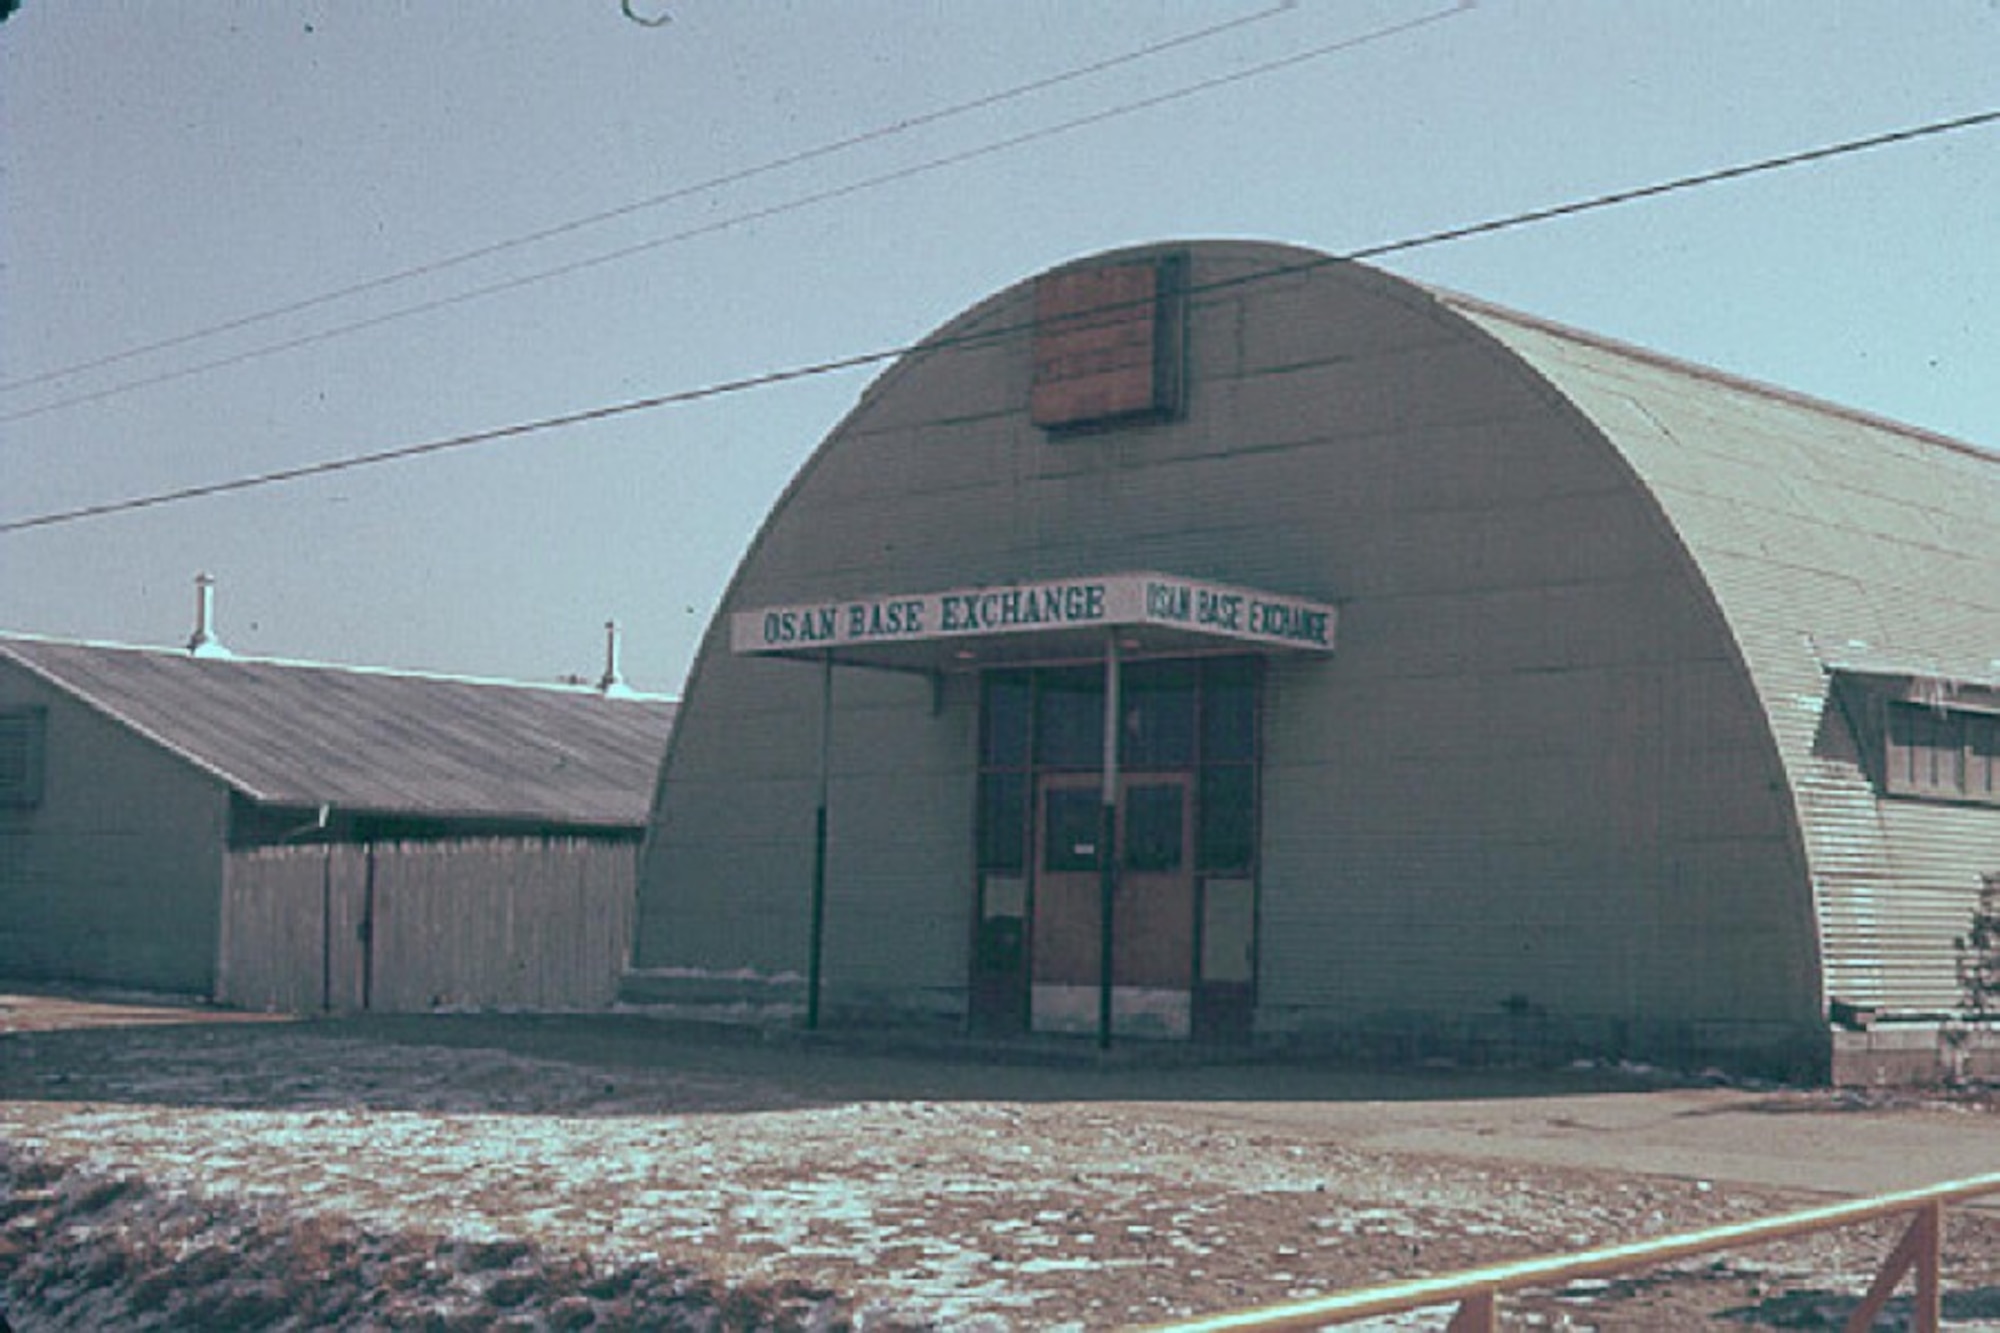 Osan Base Exchange in the late 1950's.